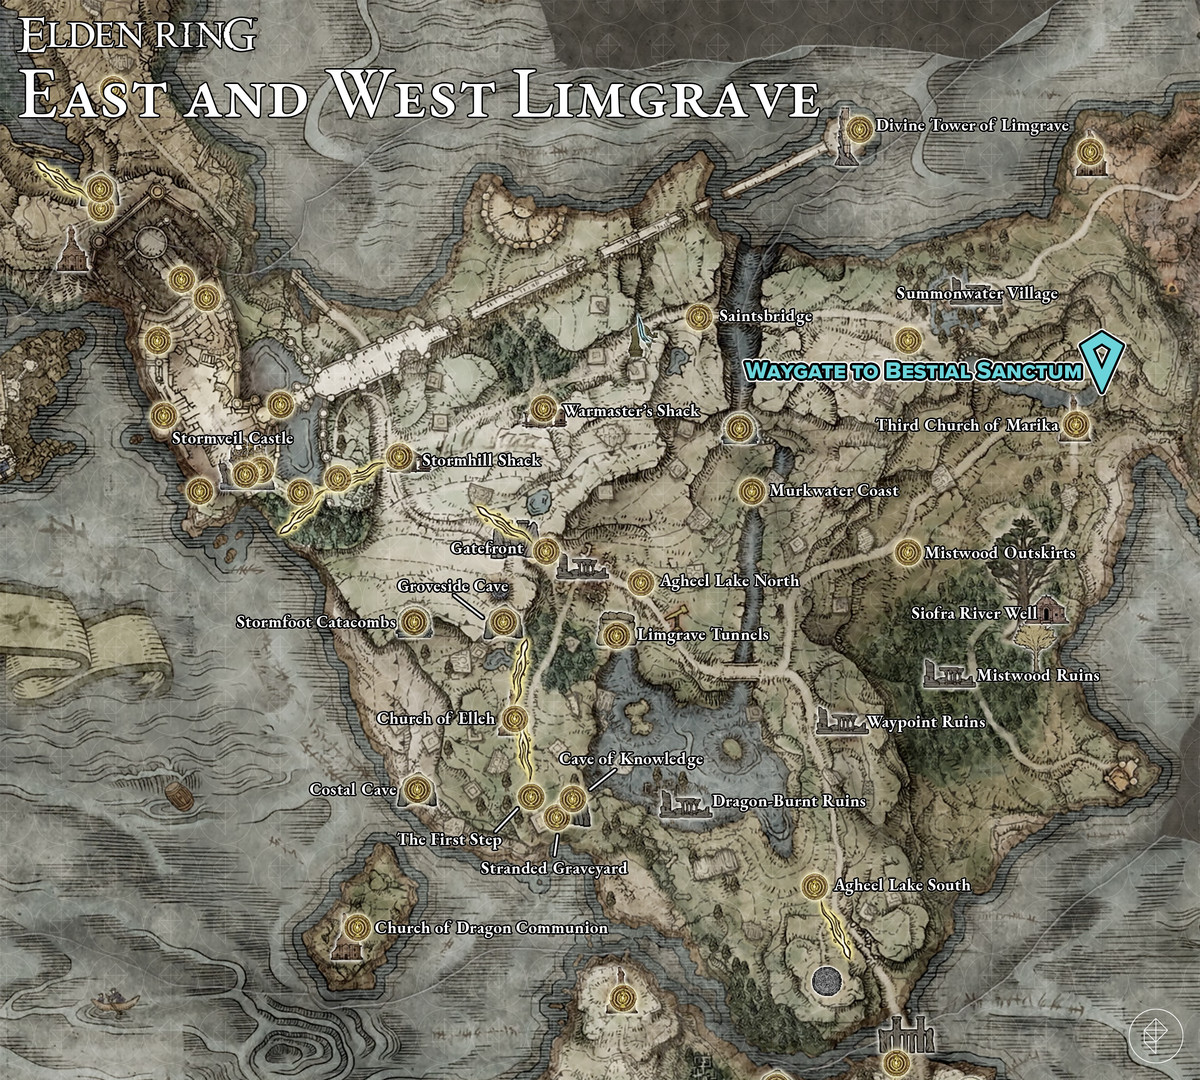 A map of Limgrave's Elden Ring with pins marking the location of the Beast Sanctuary gates.